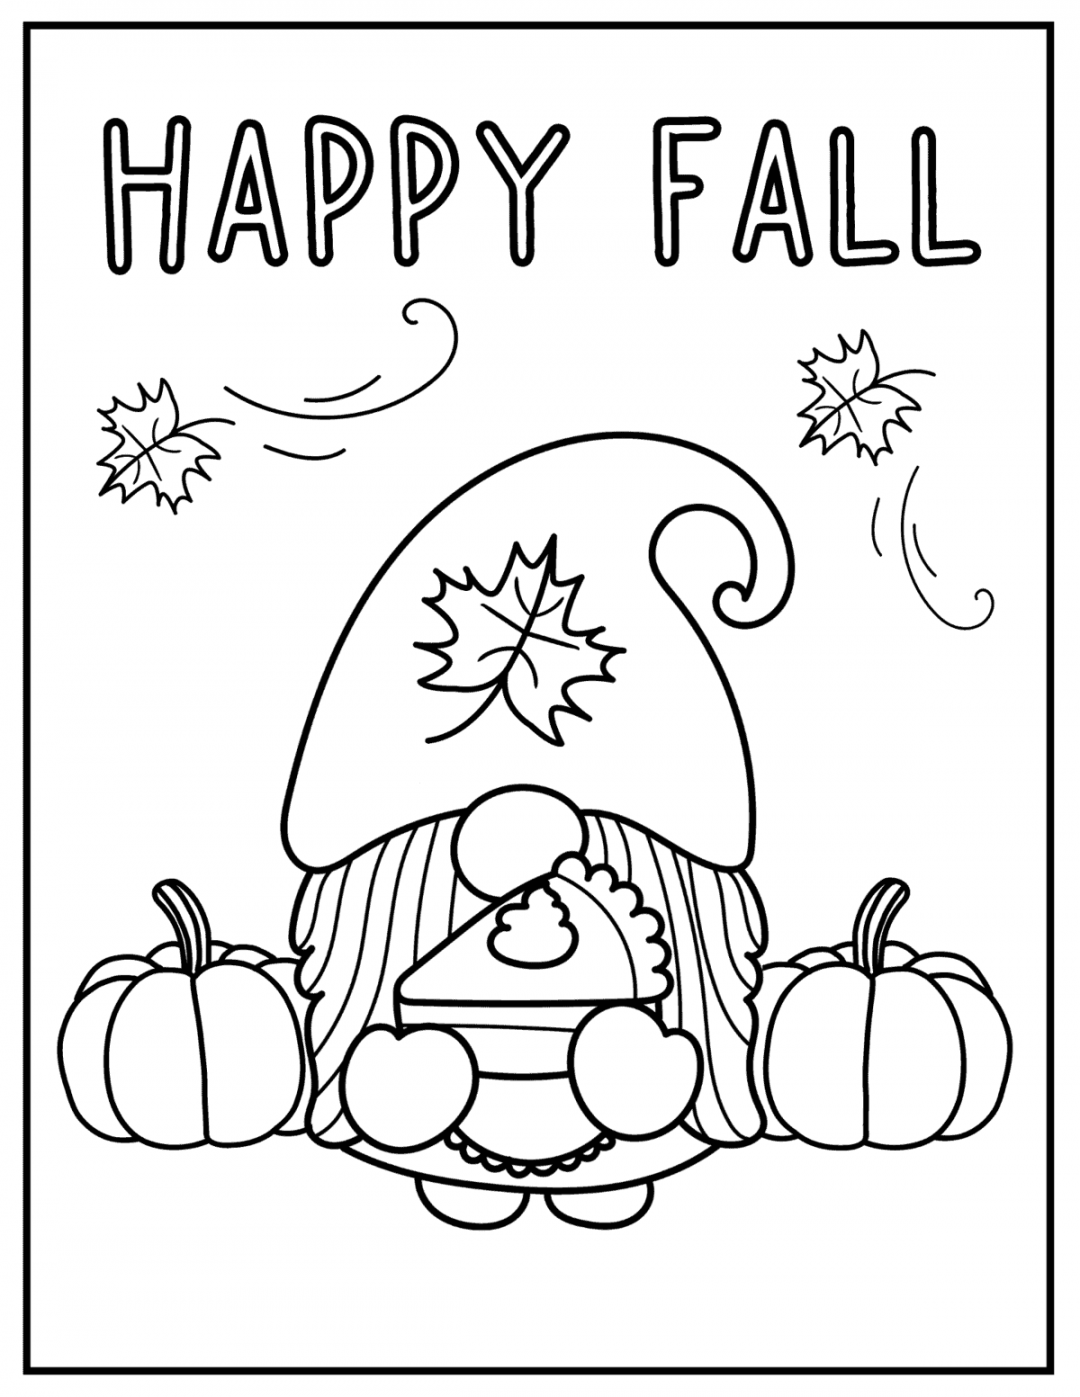 Free Fall Coloring Pages Printable - Printable -  Free Printable Fall Coloring Pages - Prudent Penny Pincher